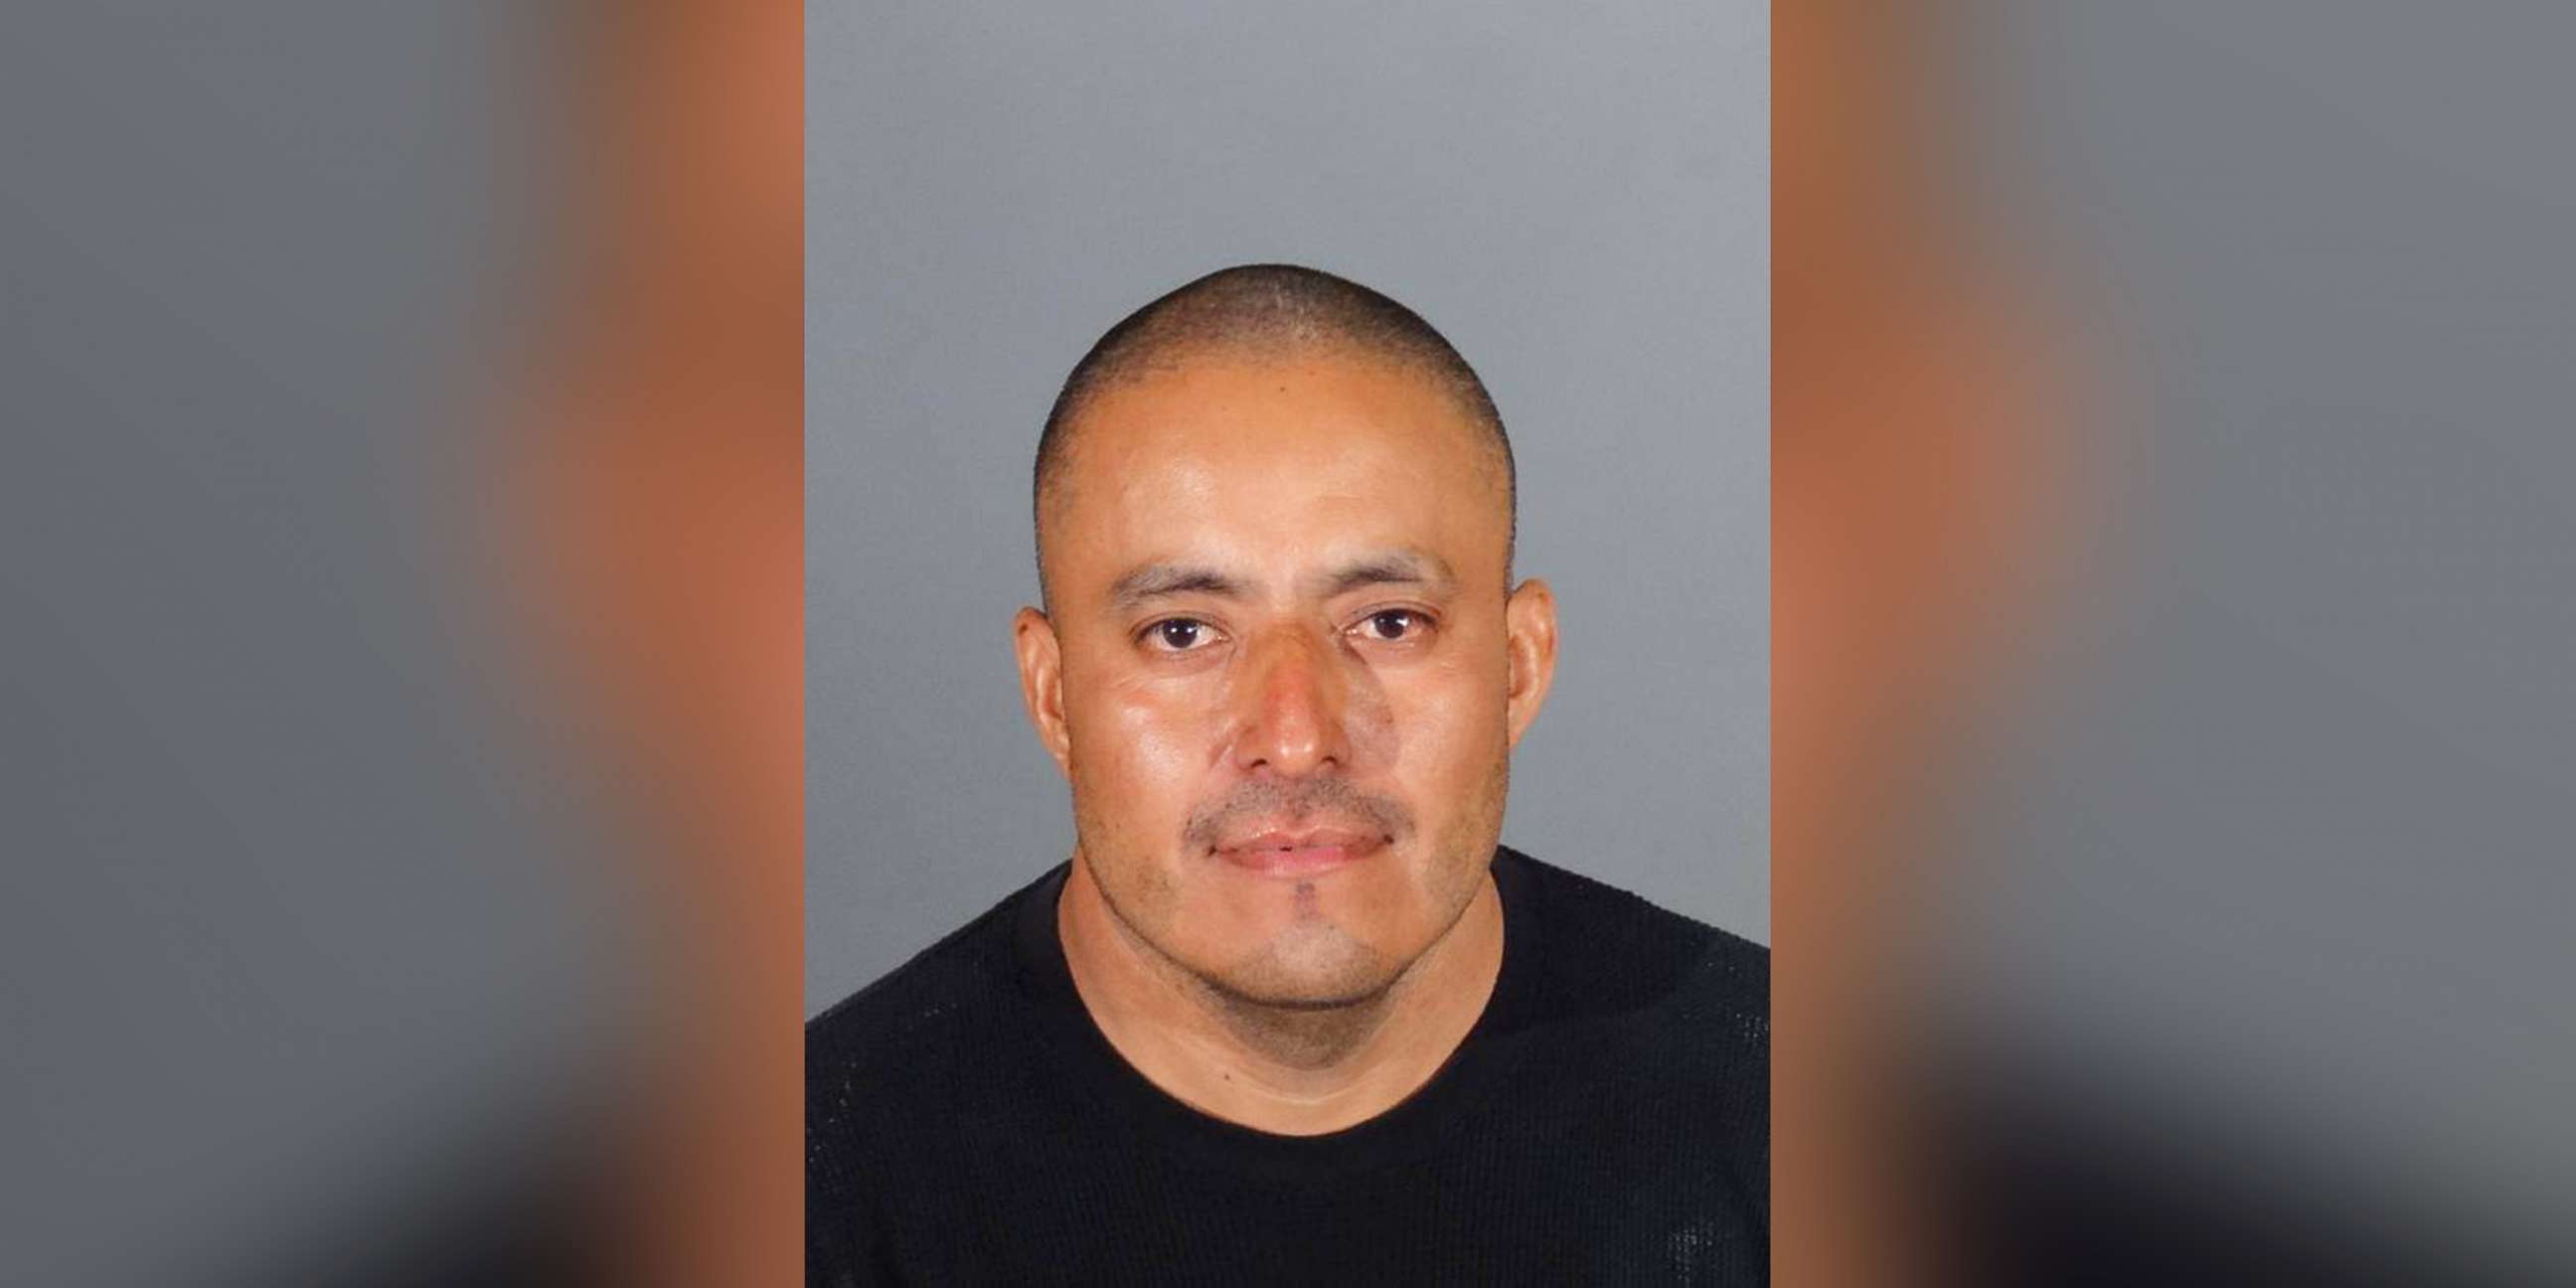 PHOTO: Juan Rodriguez is pictured in an undated handout photo released by the Los Angeles County Sheriff's Department on June 11, 2018.